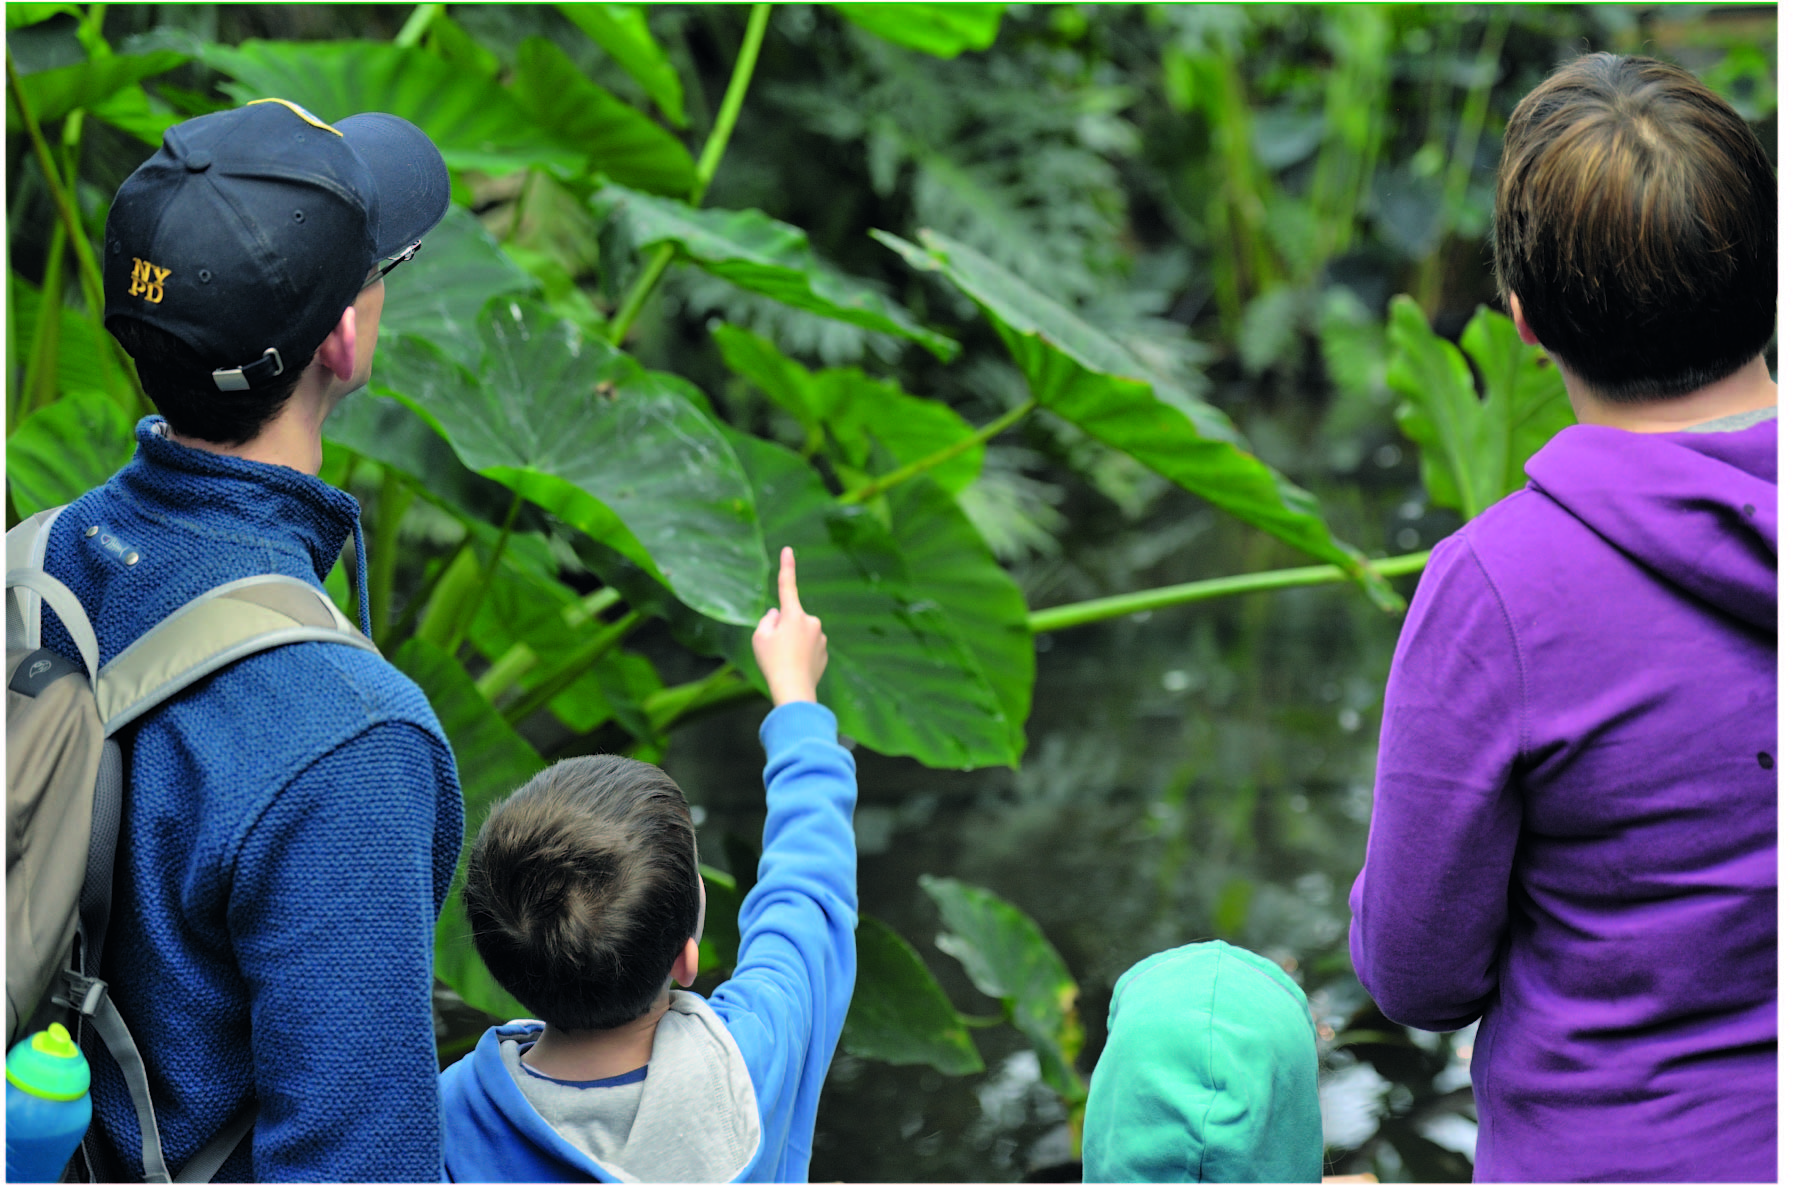 Family looking on Rainforest visit